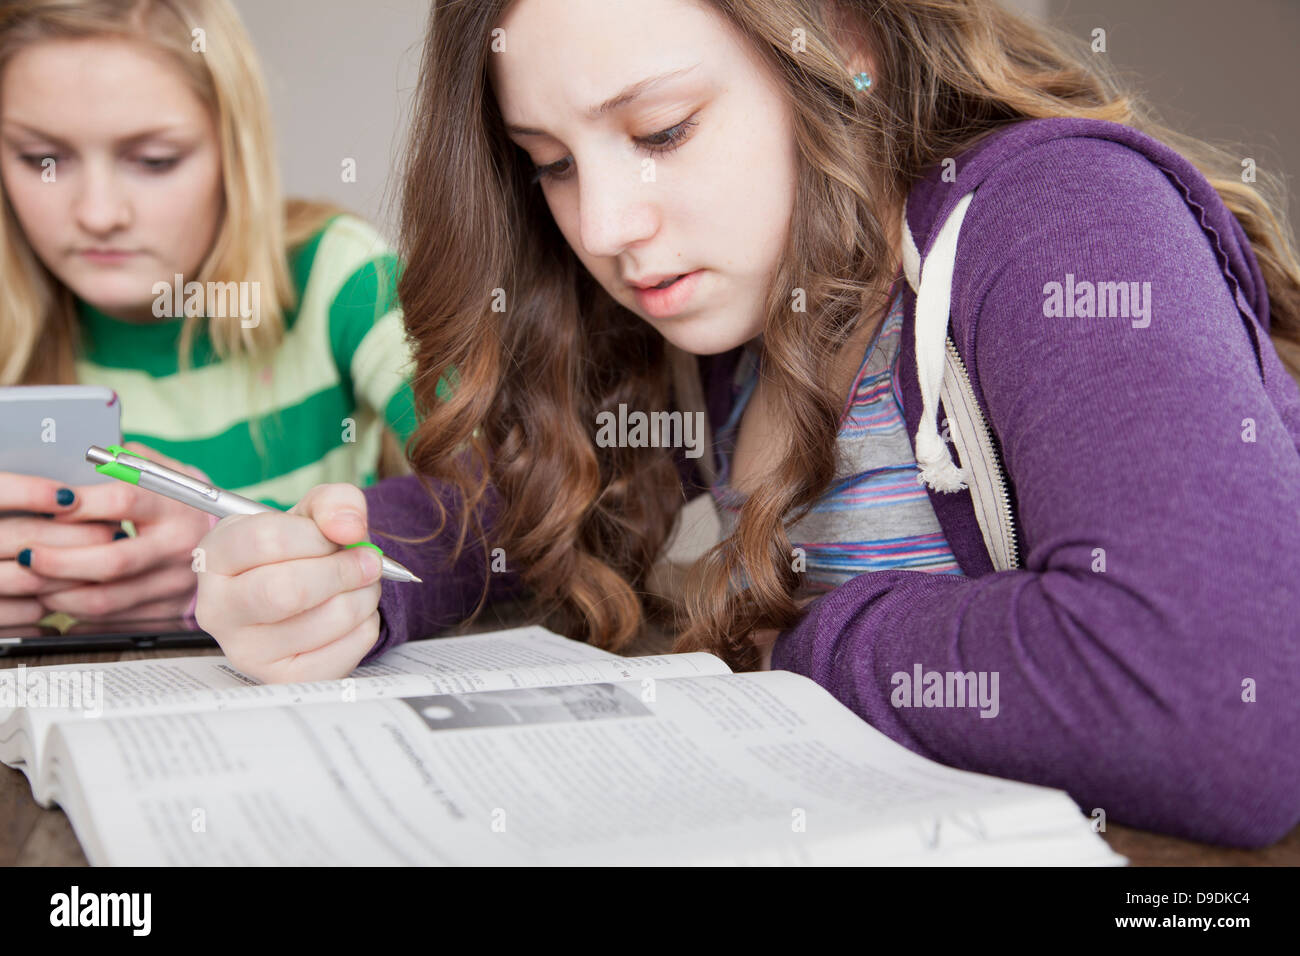 Girls sitting at table studying Stock Photo